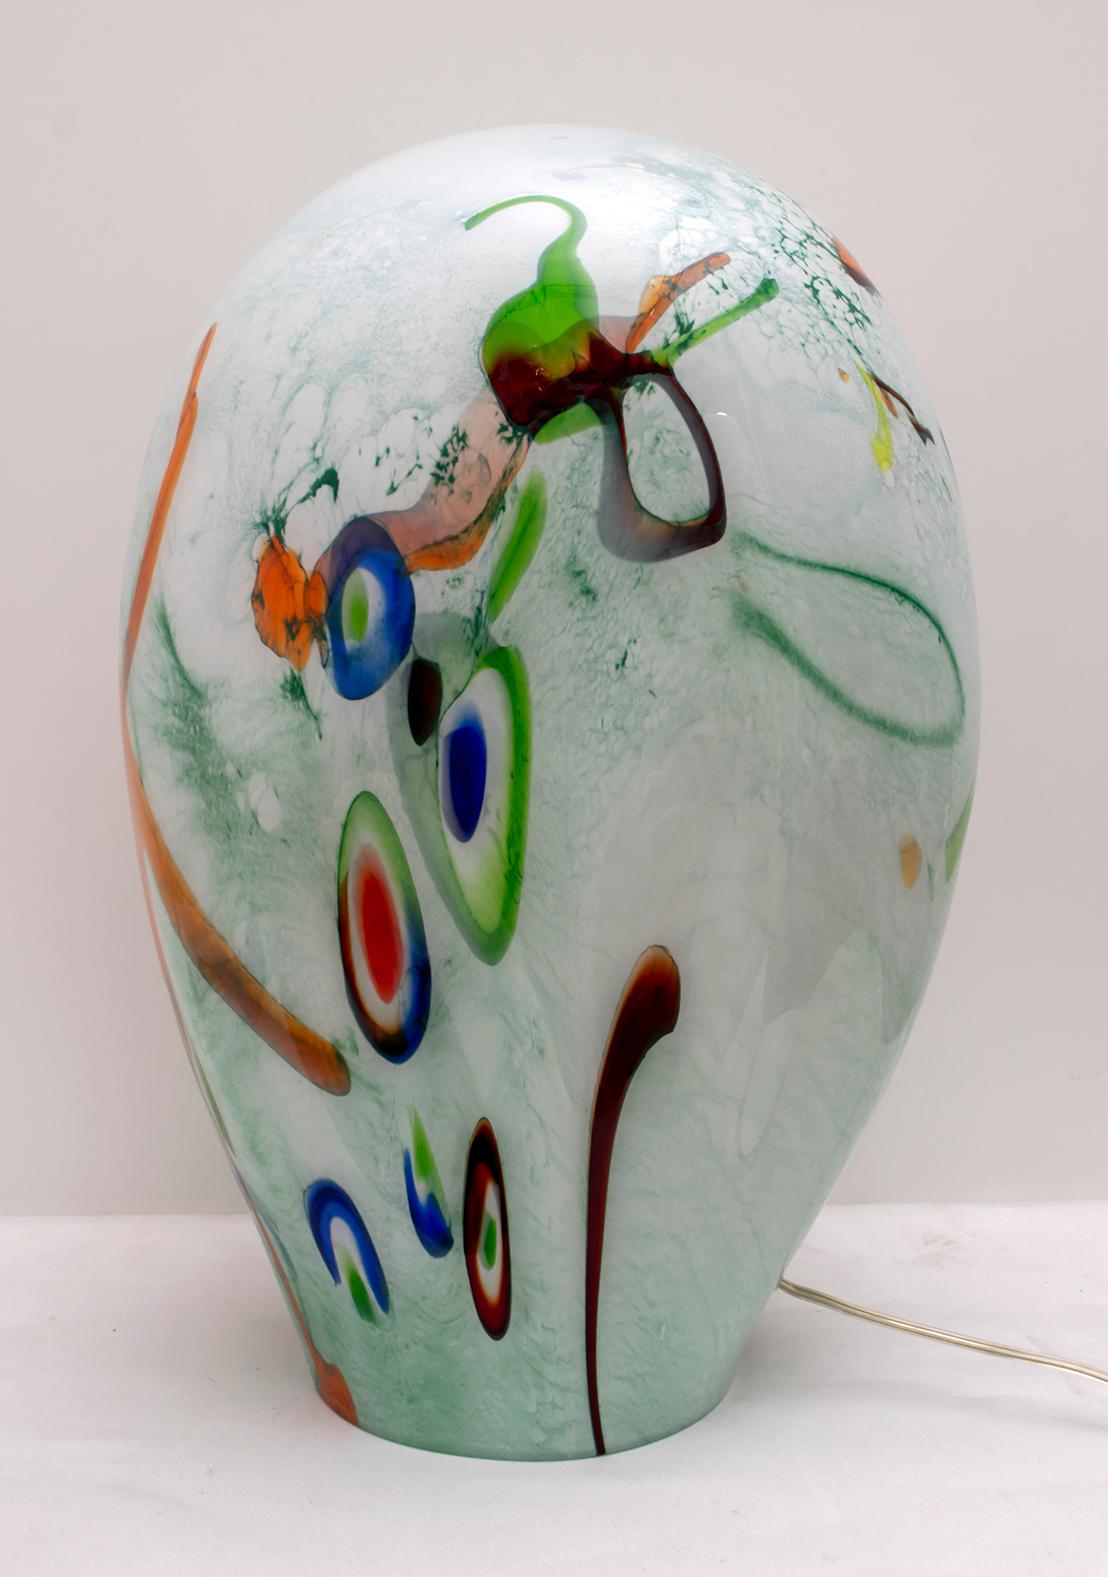 This table lamp was produced in Murano glass with three layers of different glass: transparent, white and colored Murrine glass. Produced by the company Muranocom in 2000, a company from Murano that no longer exists.

